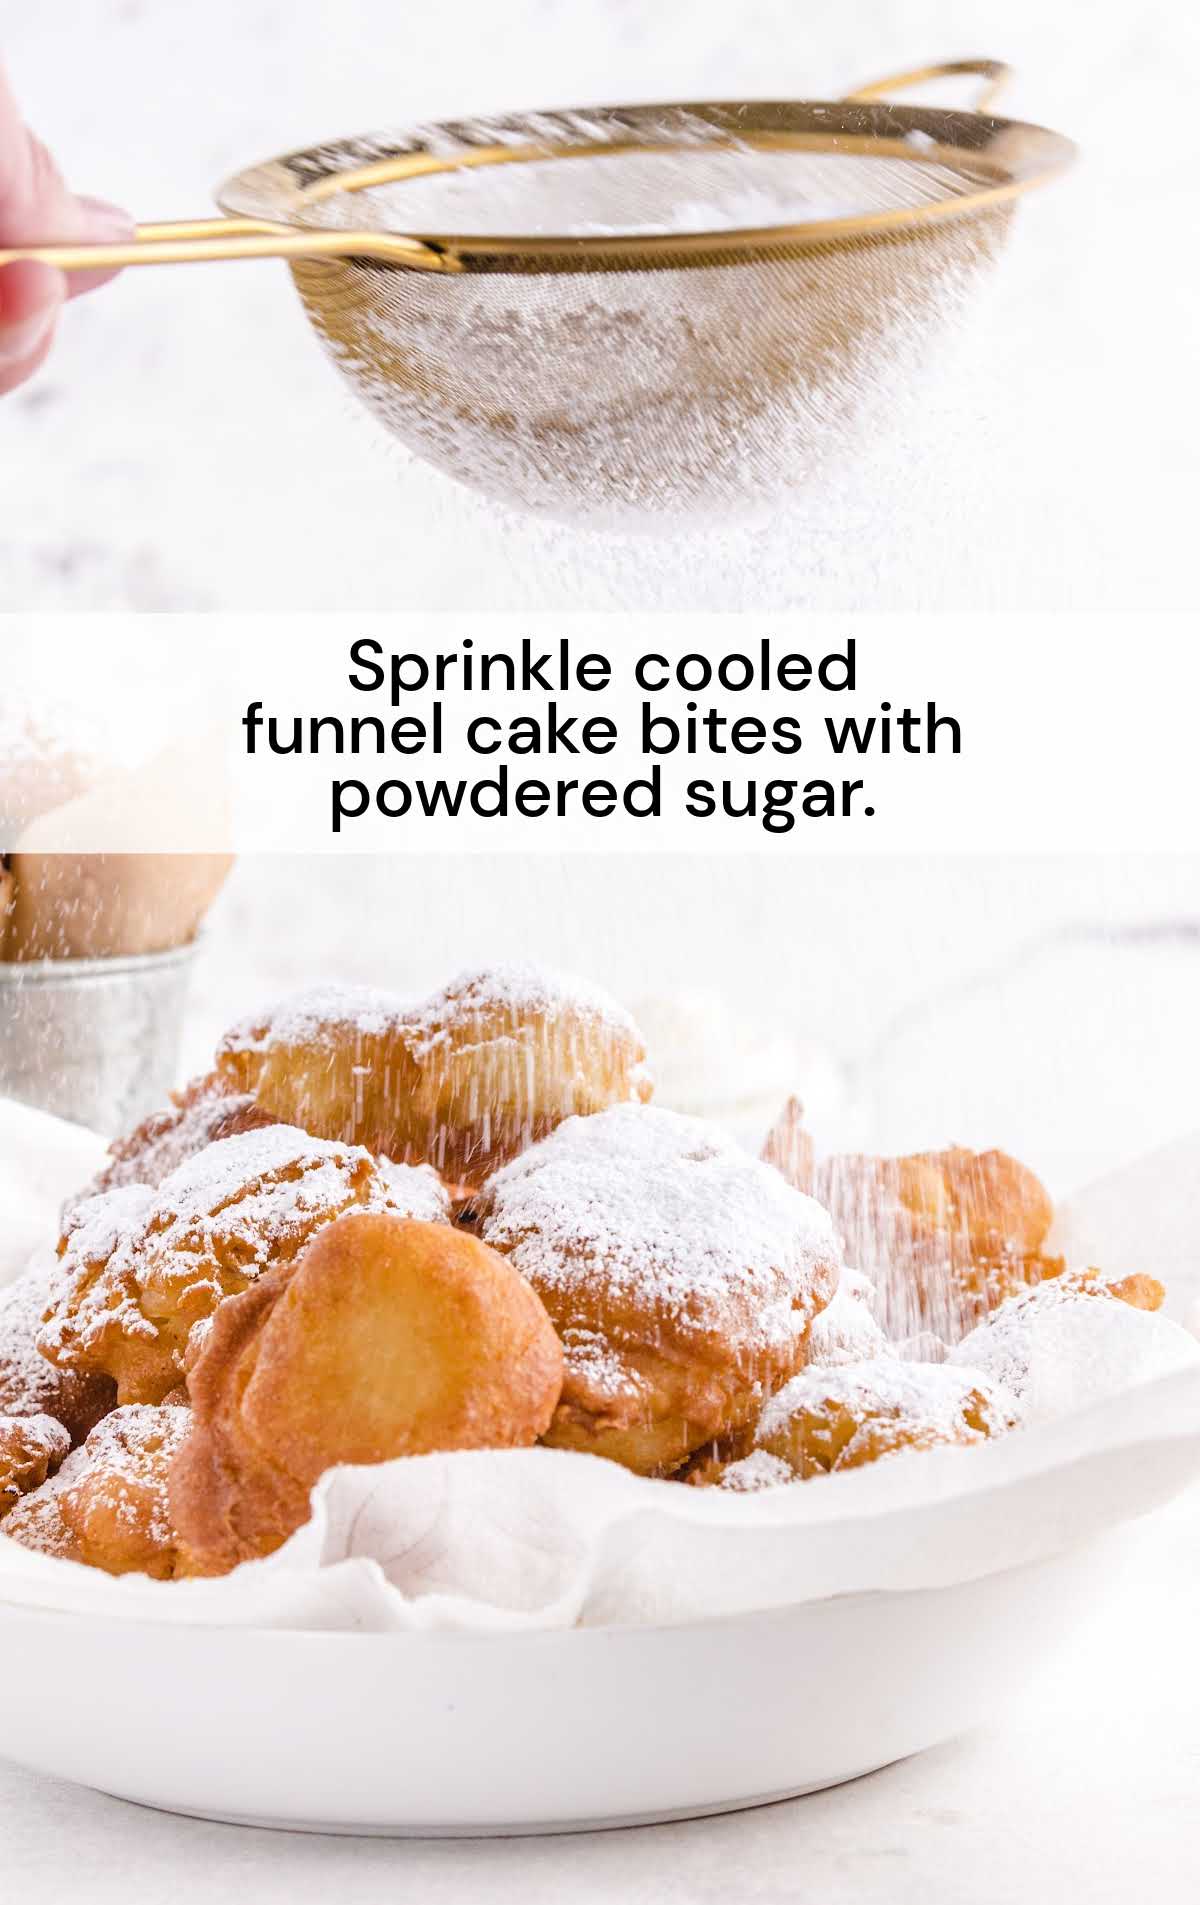 powdered sugar sprinkled on top of the funnel cake bites on a plate